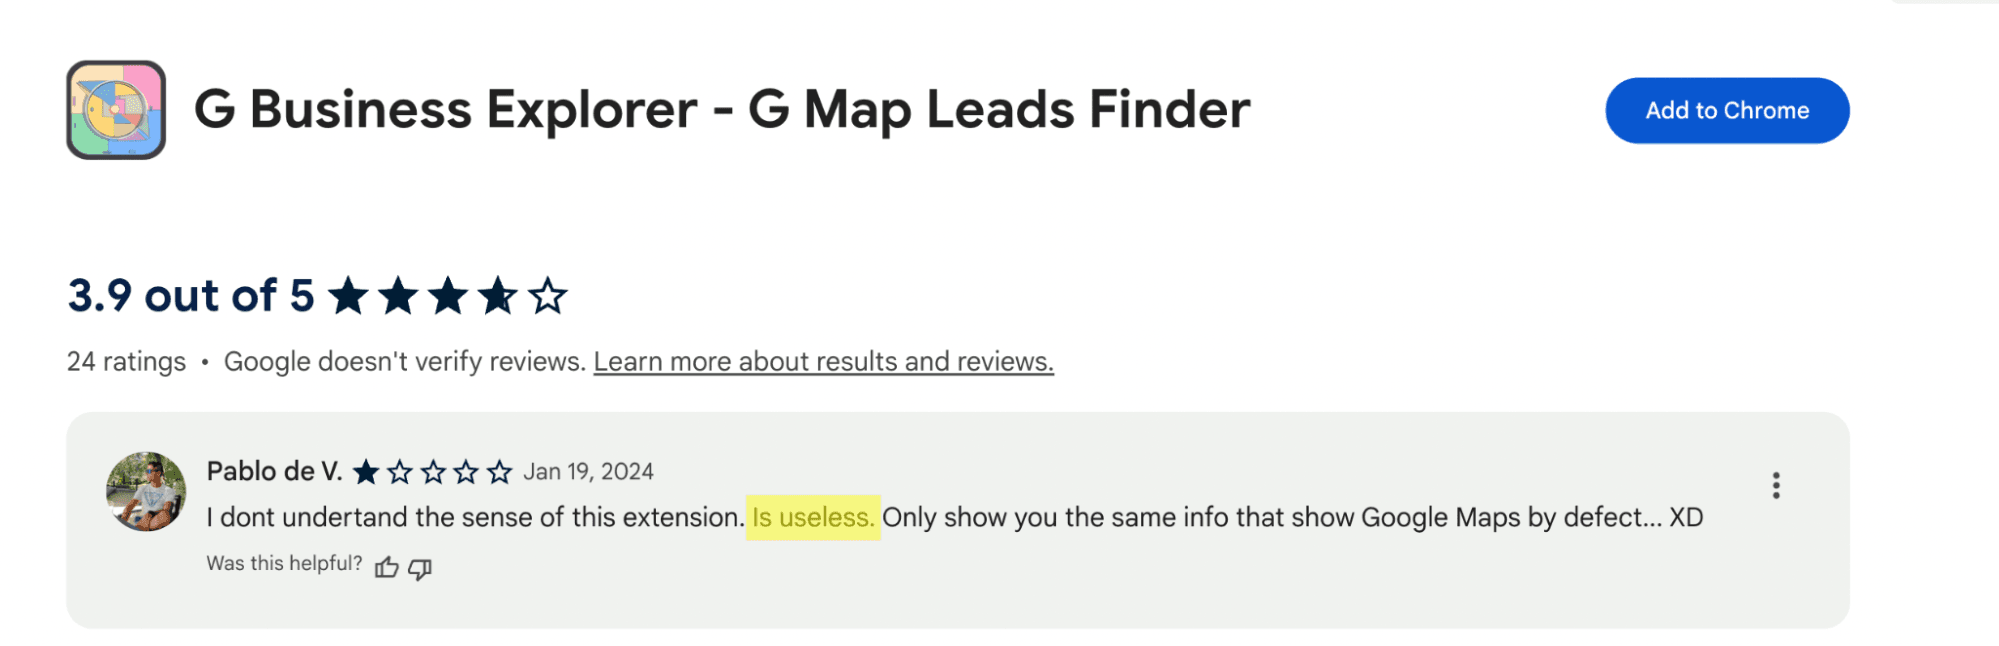 g maps leads finder screenshot google add on reviews - image16.png